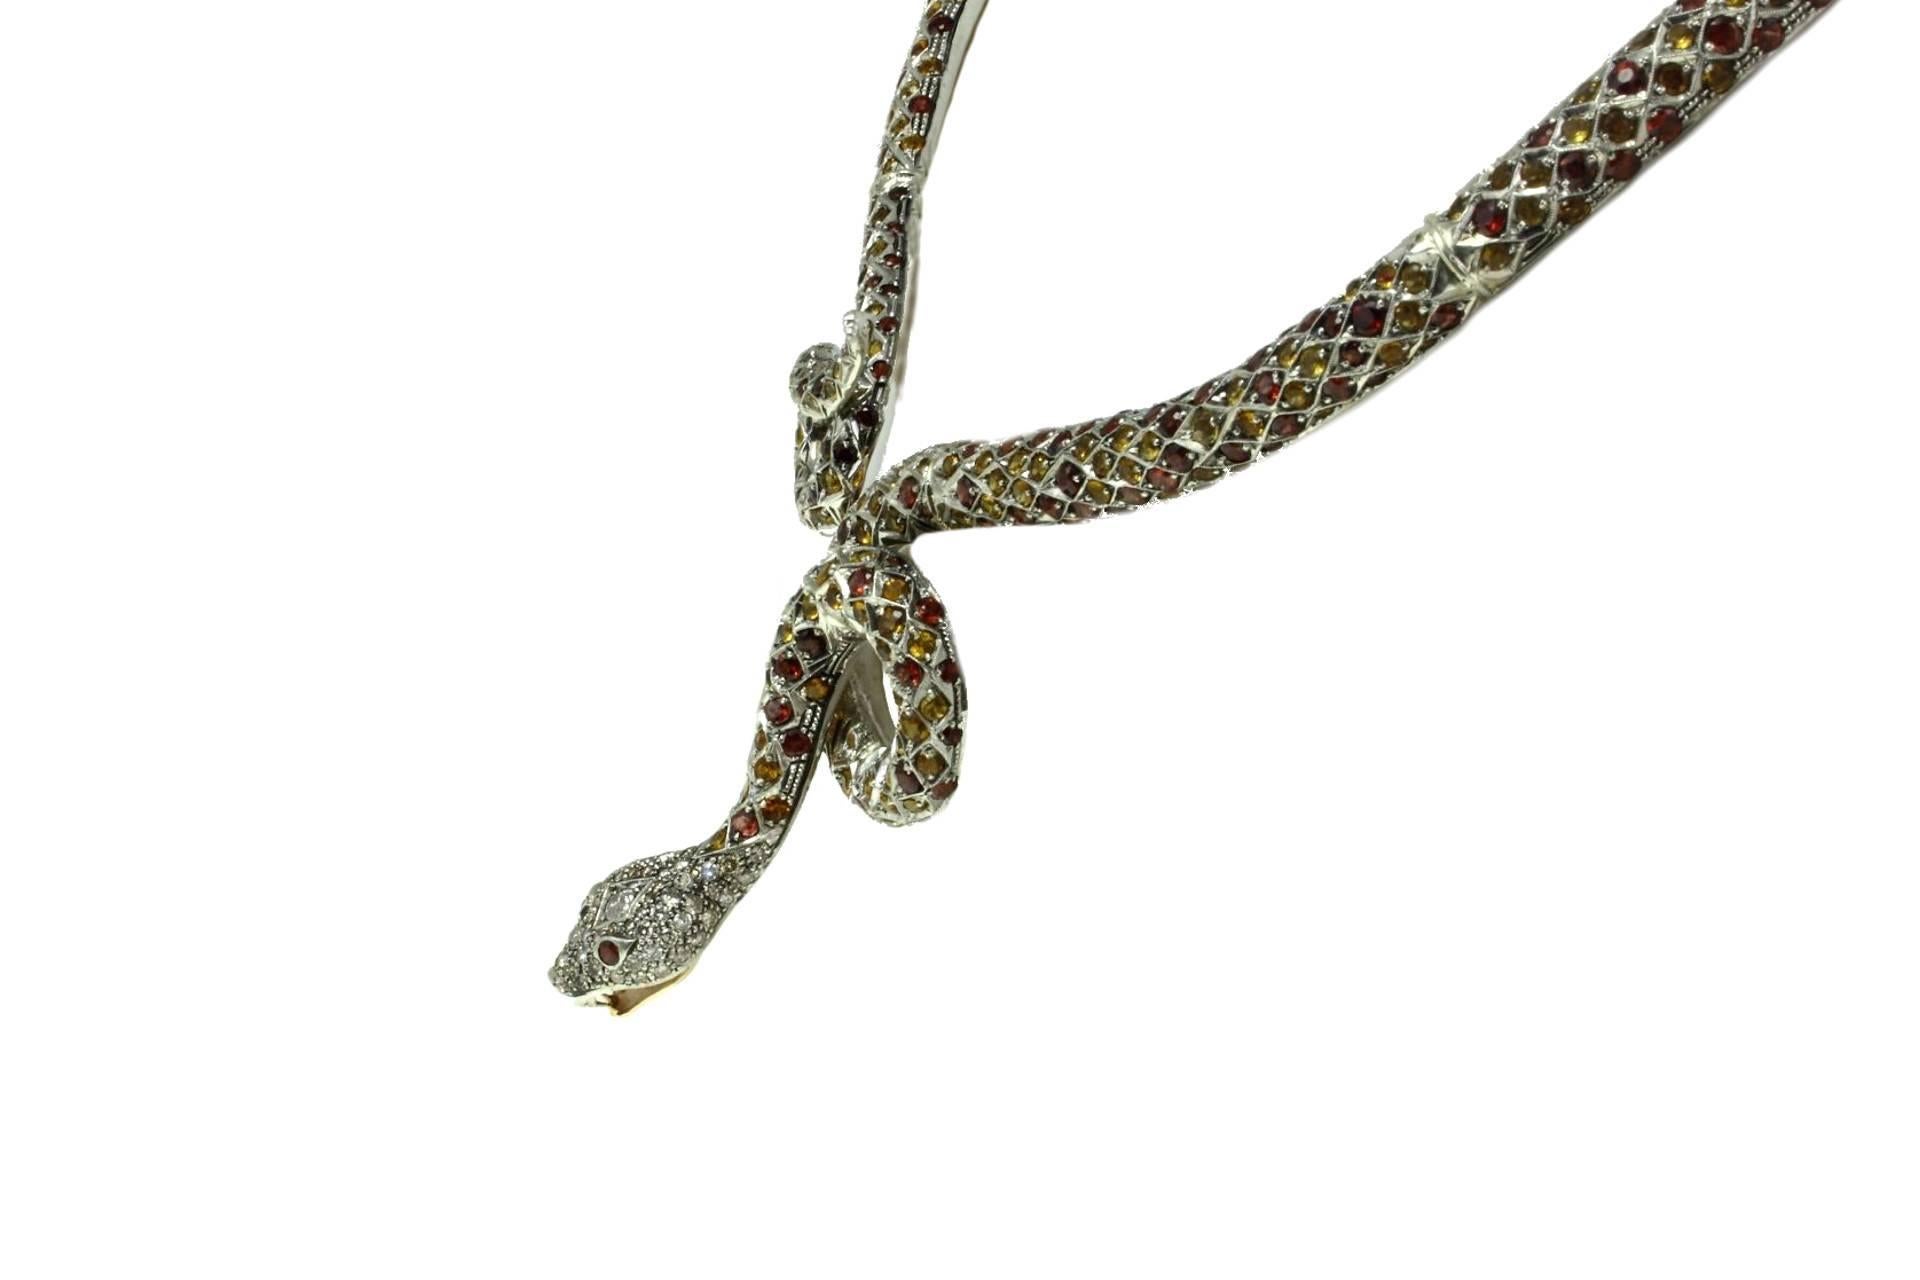 Amazing firm snake necklace in 9kt rose gold and silver. The snake body is all covered in garnets and topazes insteard the hera is covered in diamonds with garnets eyes.
total gemstone kt 80,00
diamonds 3.01kt
tot weight 102.0gr
r.f   ggiia